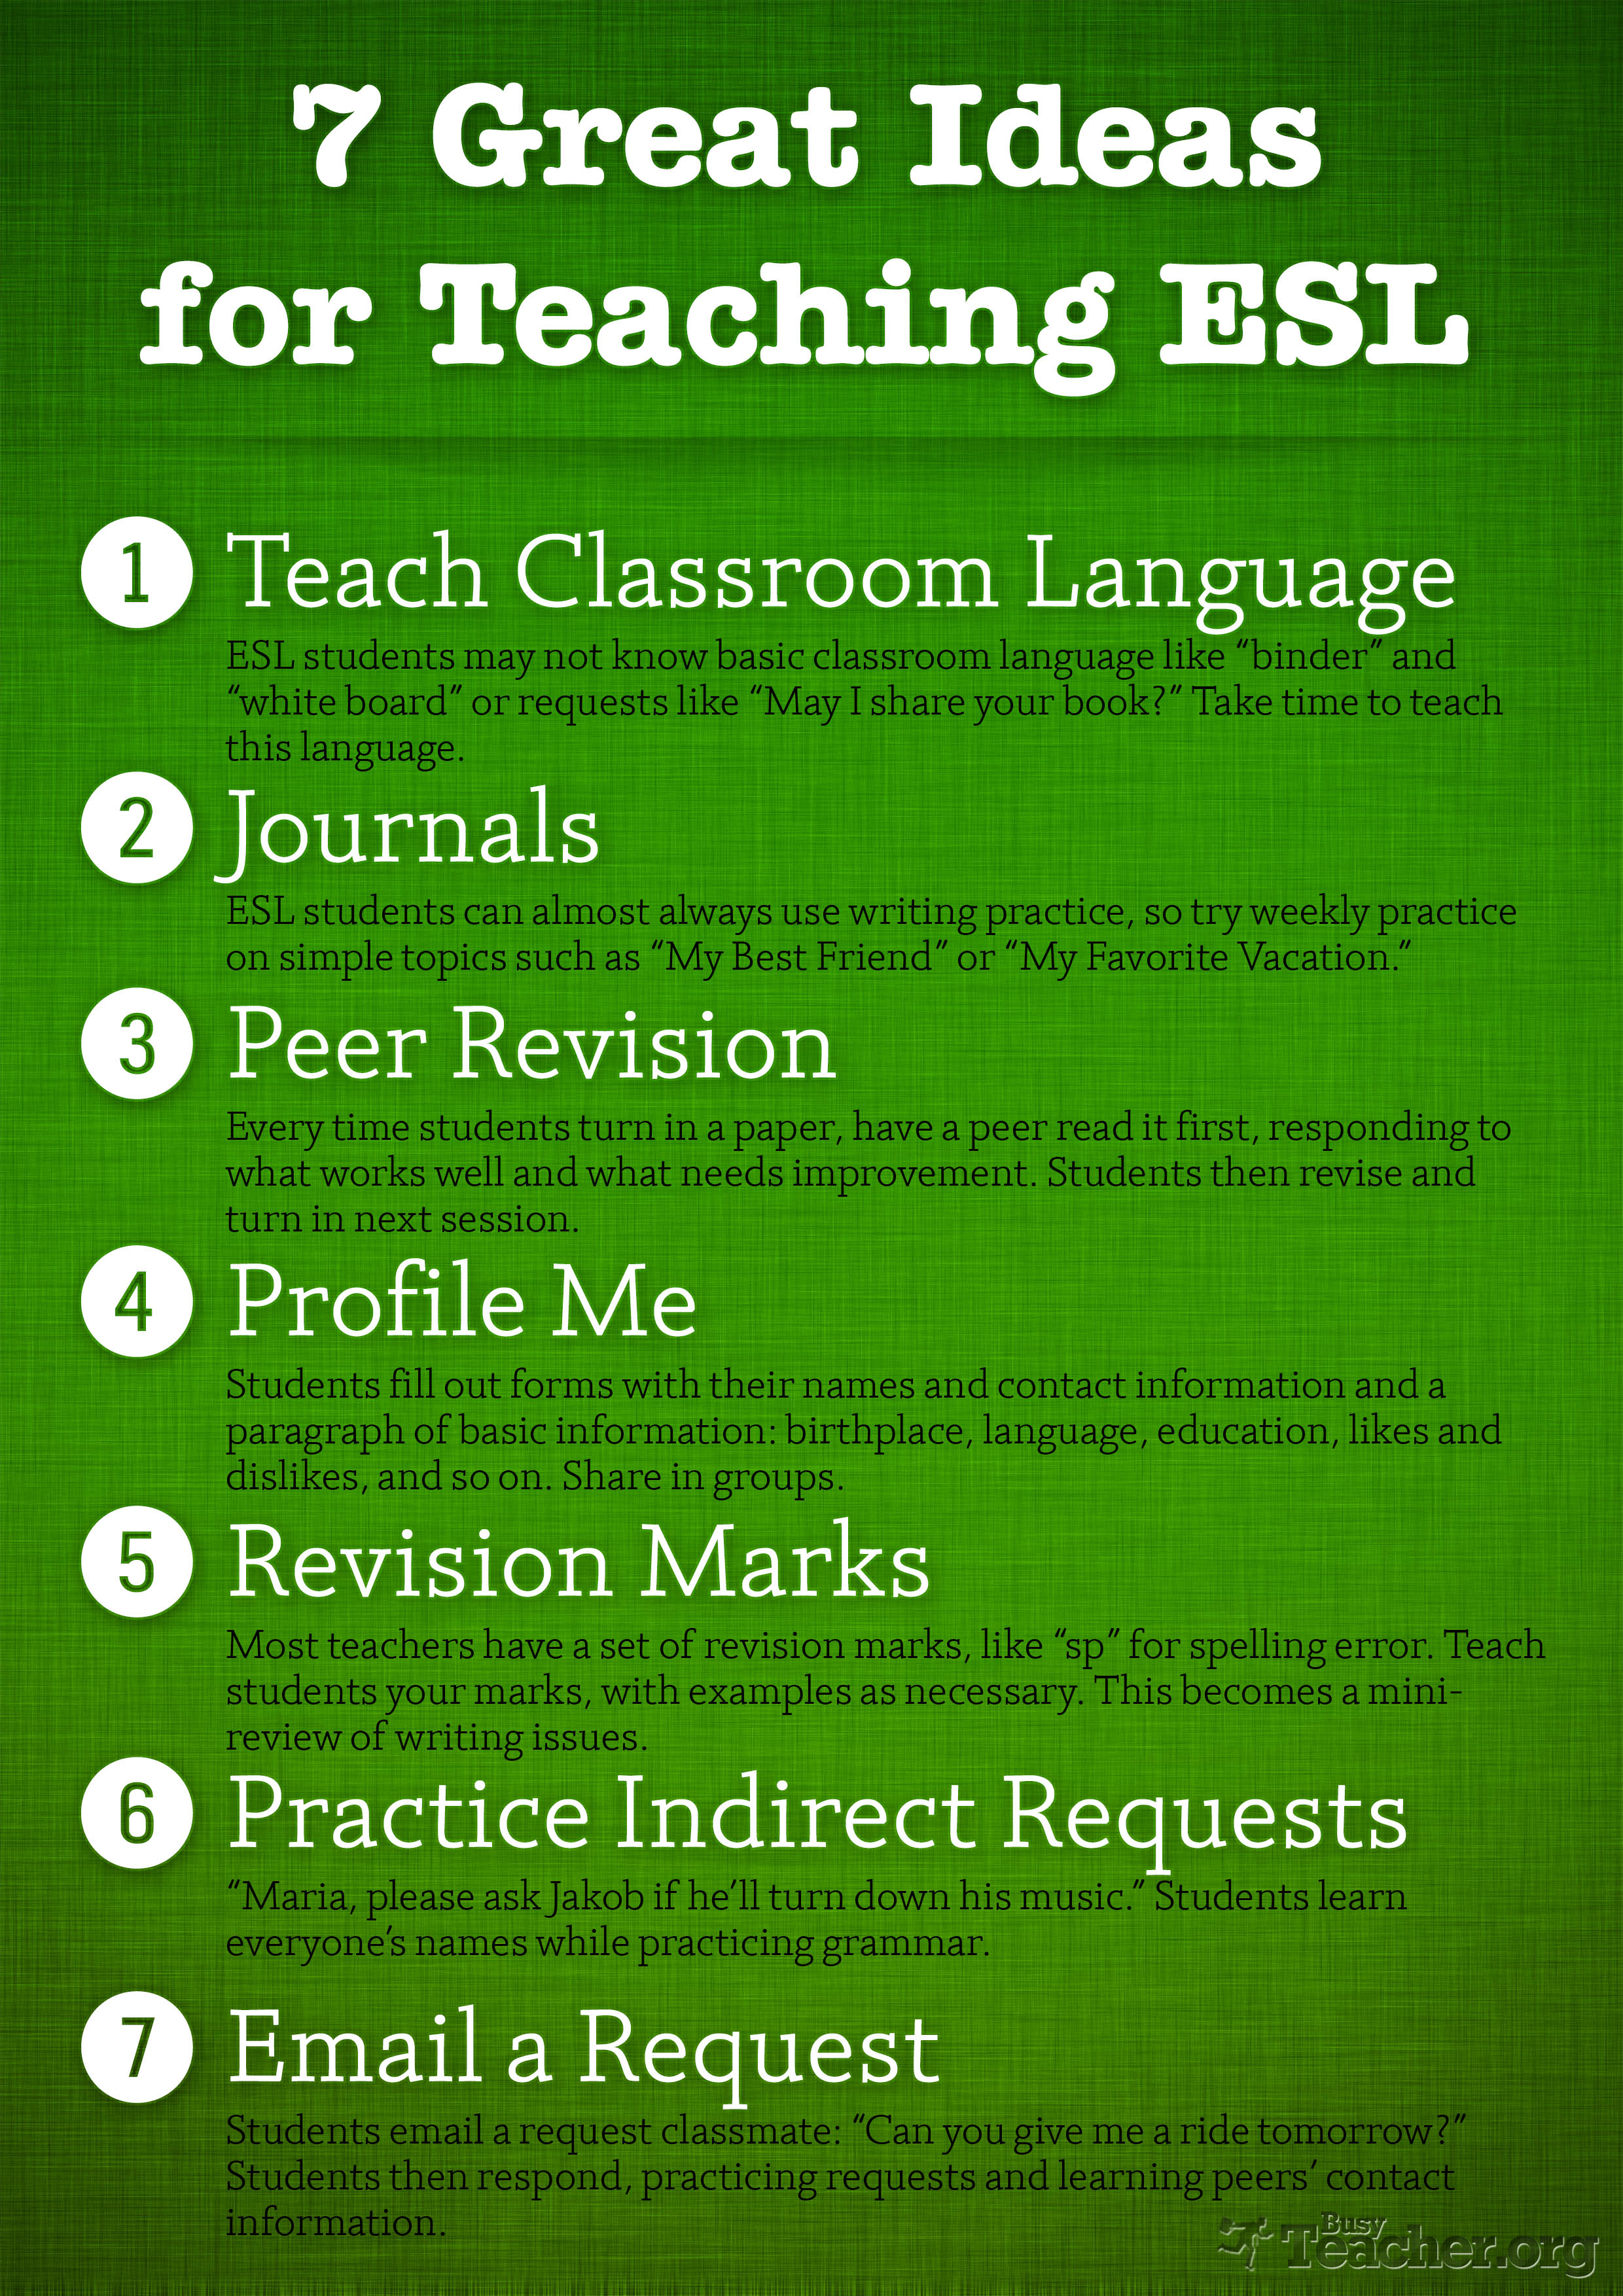 POSTER: 7 Great Ideas For Teaching ESL